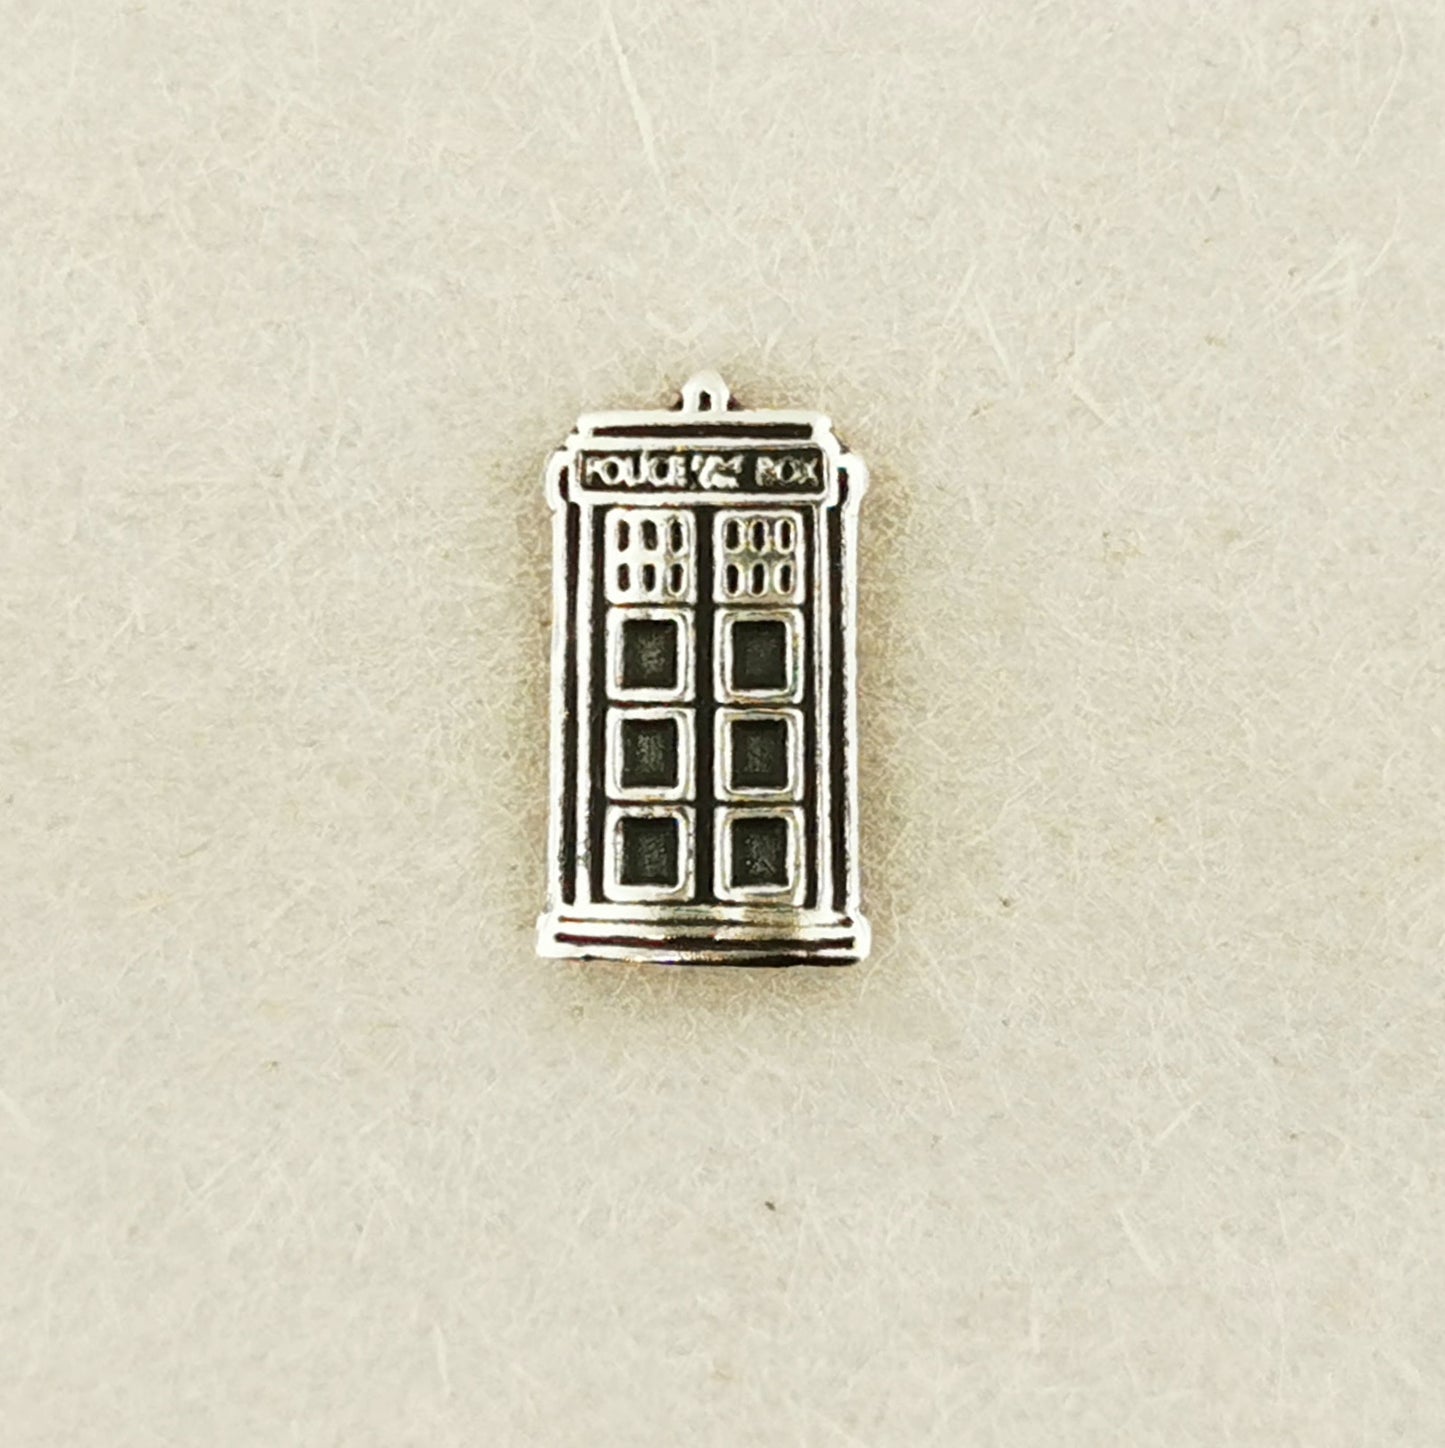 Gold Dr Who Tardis Stud Earrings made to order, Dr Who Earrings, Phone Box Stud Earrings, Sci-Fi Stud Earrings, Gold Police Box Earrings, Gold Stud Earrings, Gold Phone Box Studs, Dr Who Phone Box Earrings, Dr Who Jewelry, Gold Tardis Earrings